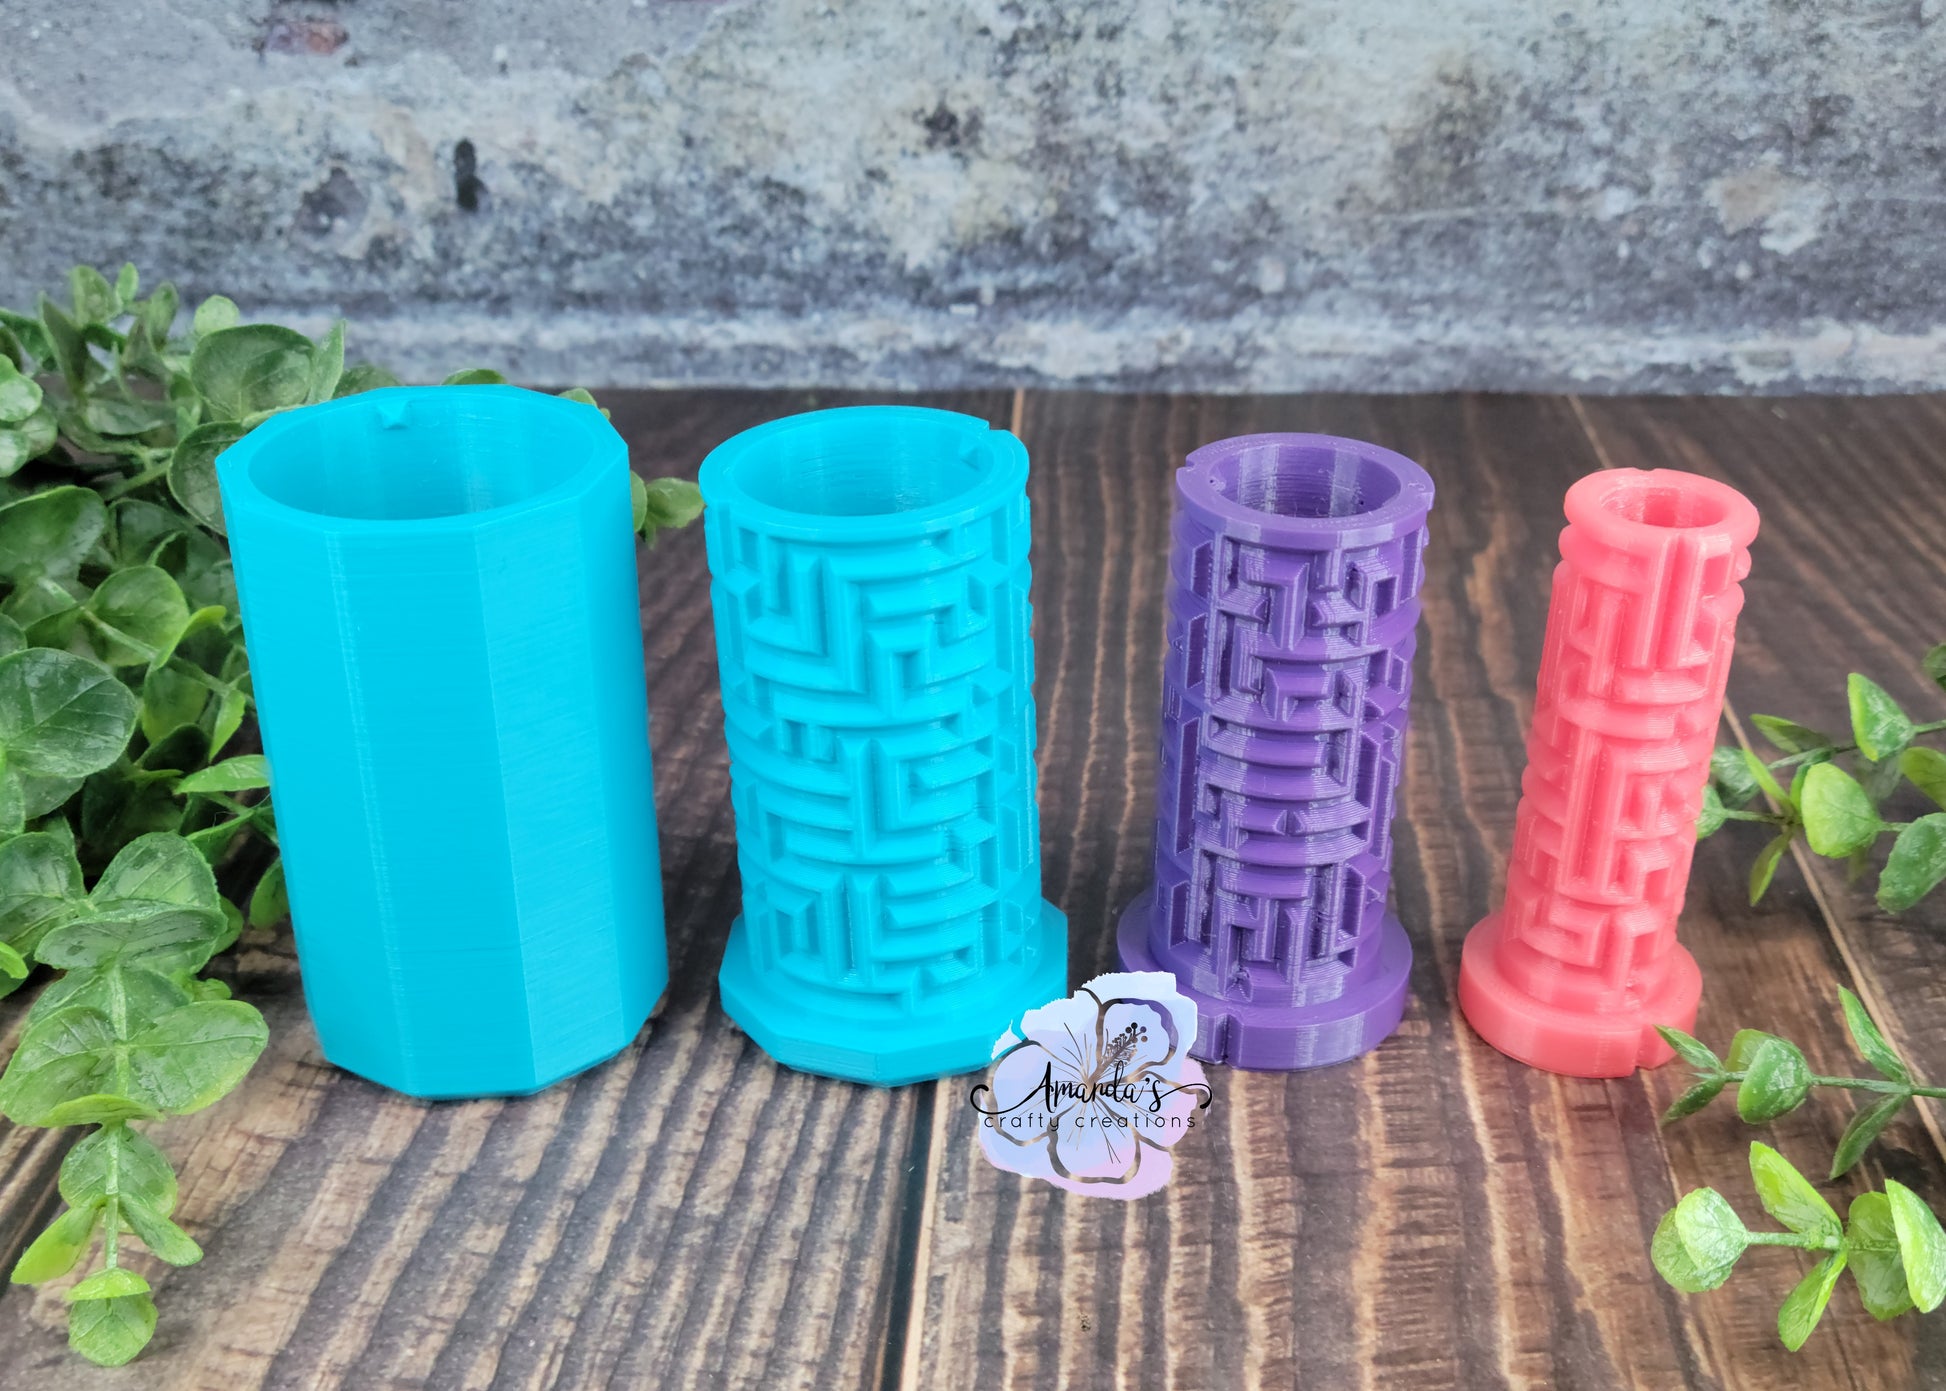 3D printed Russian doll maze